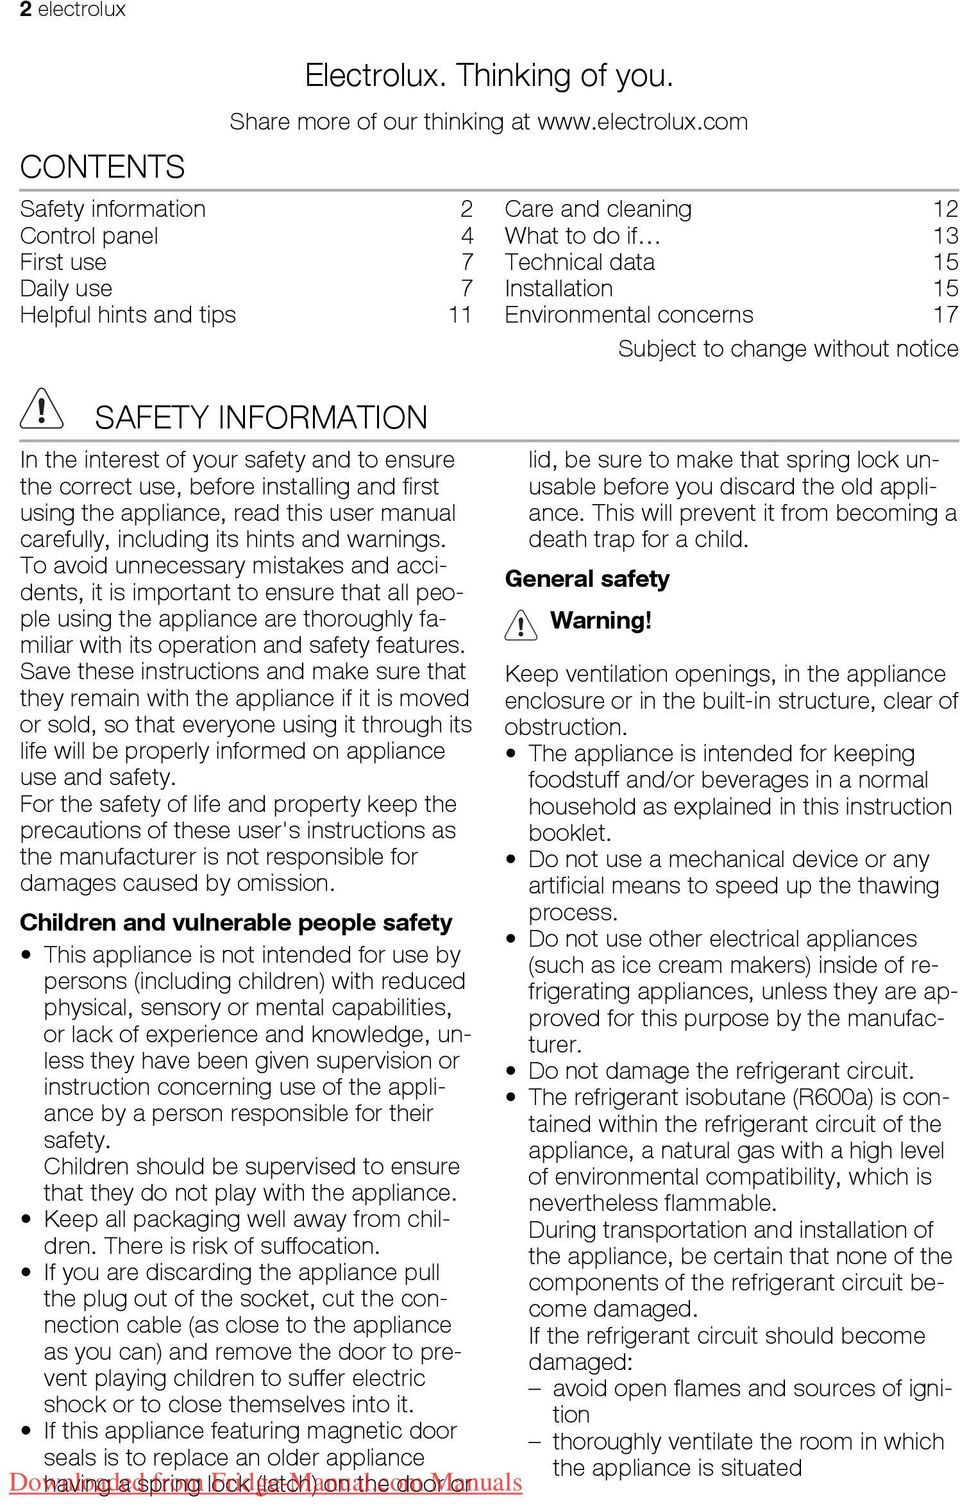 com Safety information 2 Control panel 4 First use 7 Daily use 7 Helpful hints and tips 11 SAFETY INFORMATION In the interest of your safety and to ensure the correct use, before installing and first